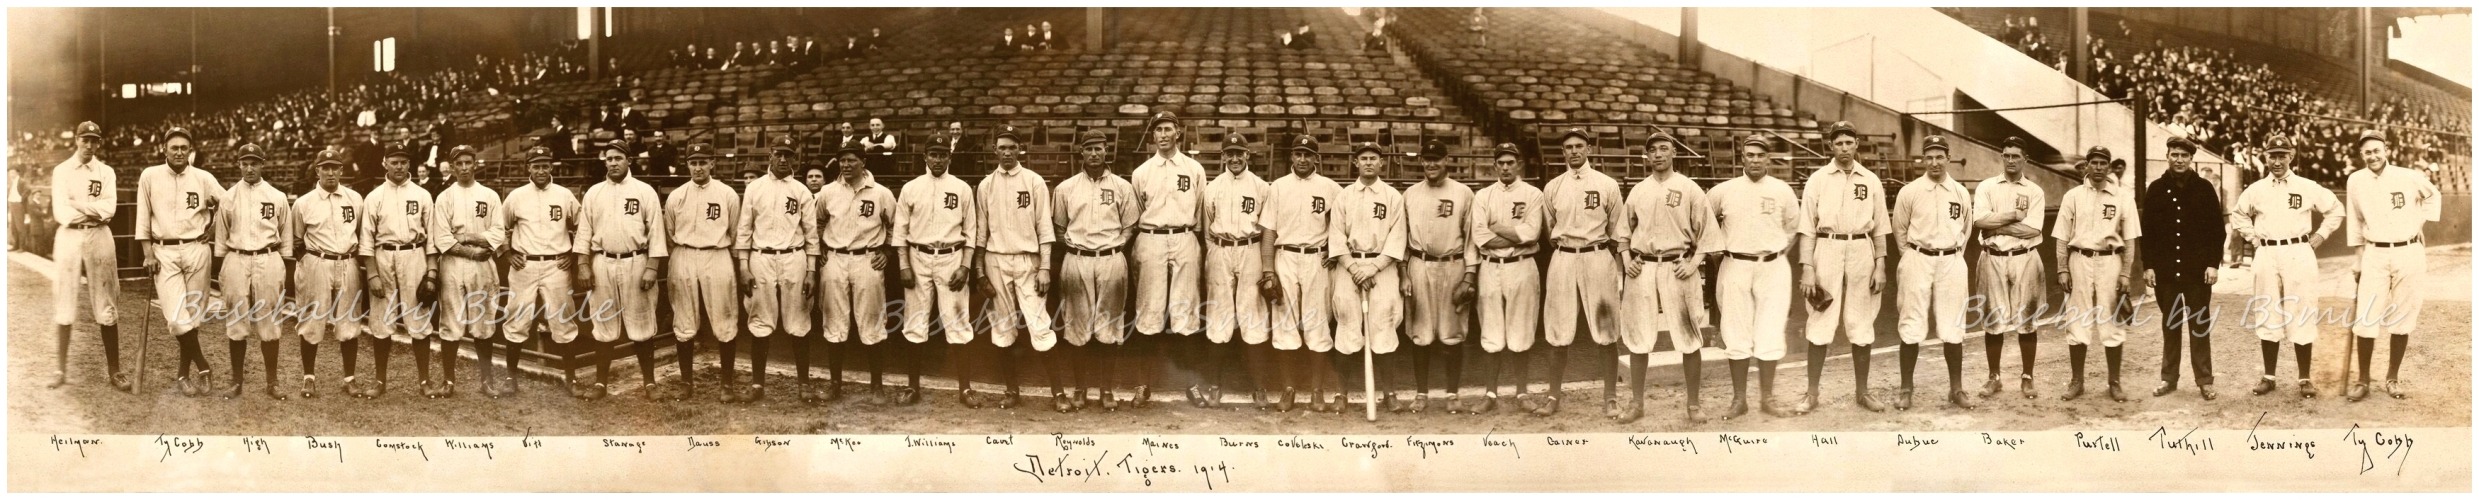 Ty Cobb doubles himself in 1914 team panoramic photo